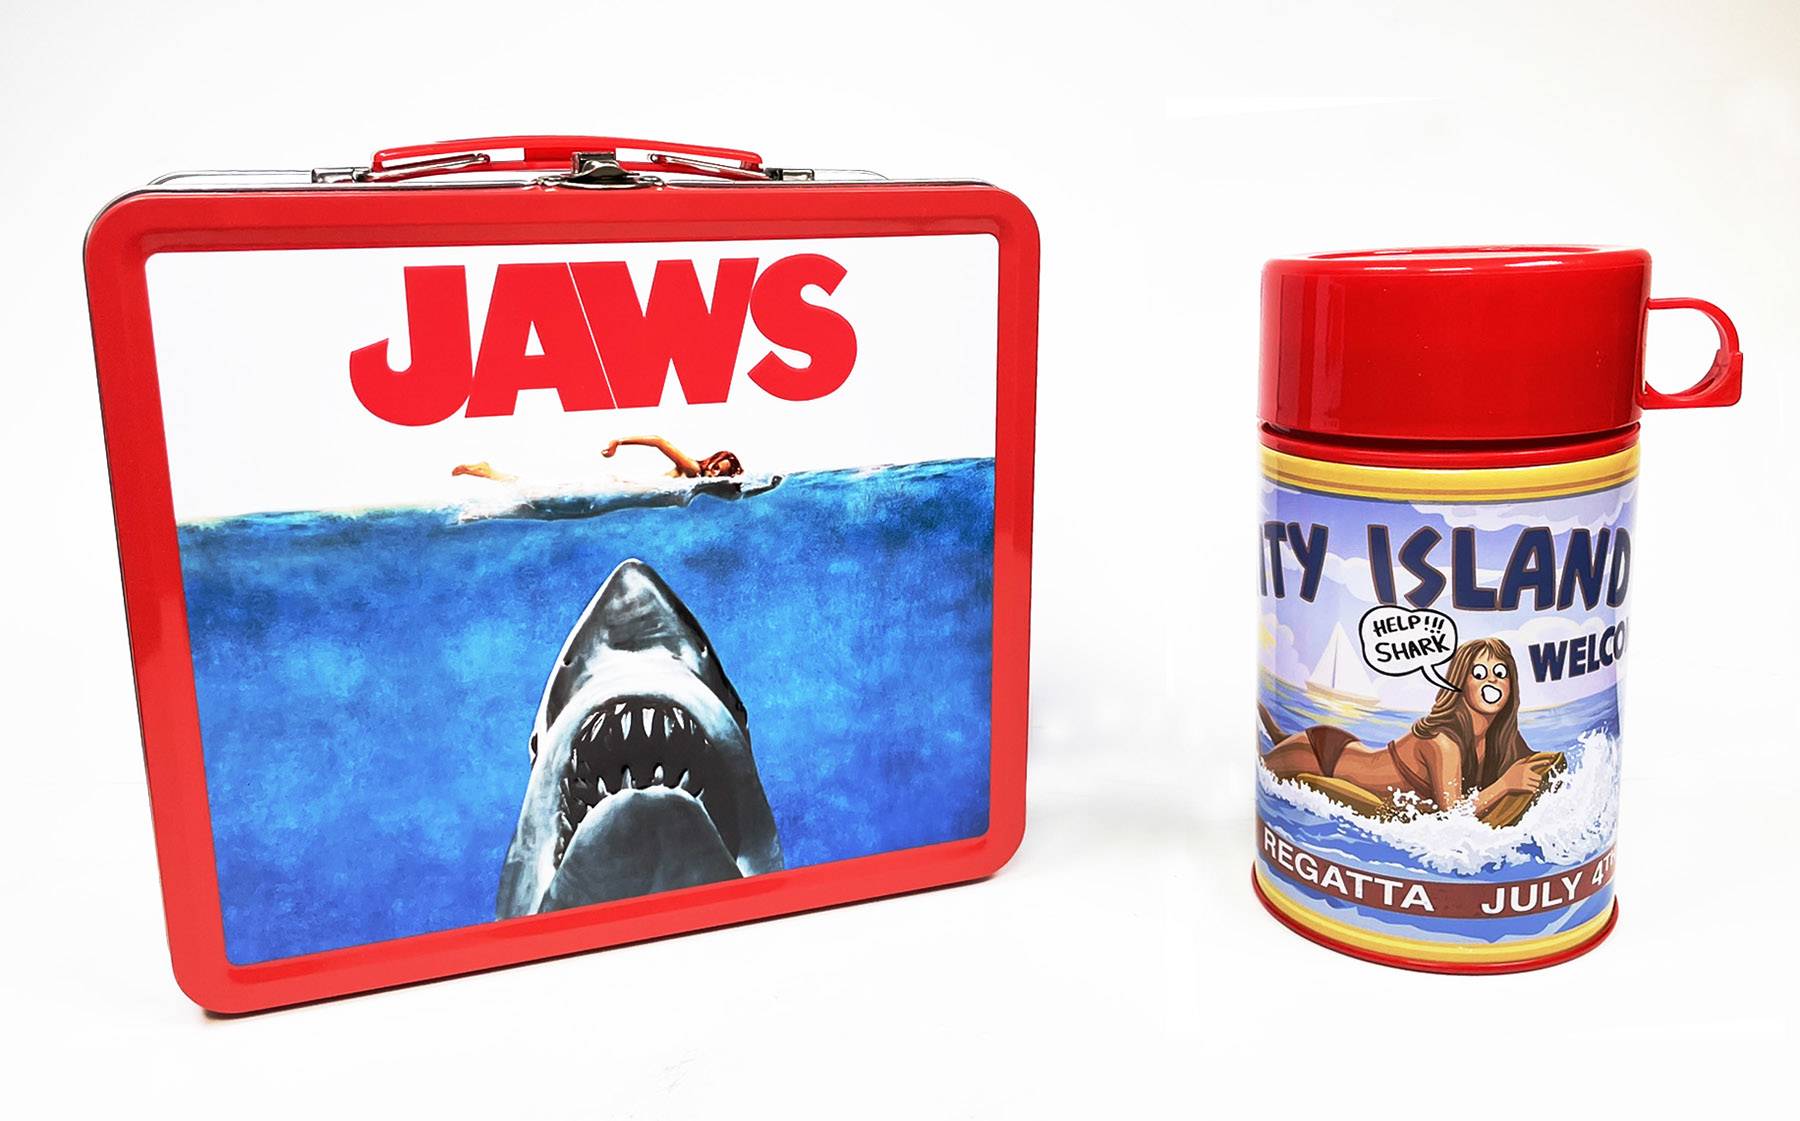 TIN TITANS JAWS PX LUNCHBOX & BEV CONTAINER